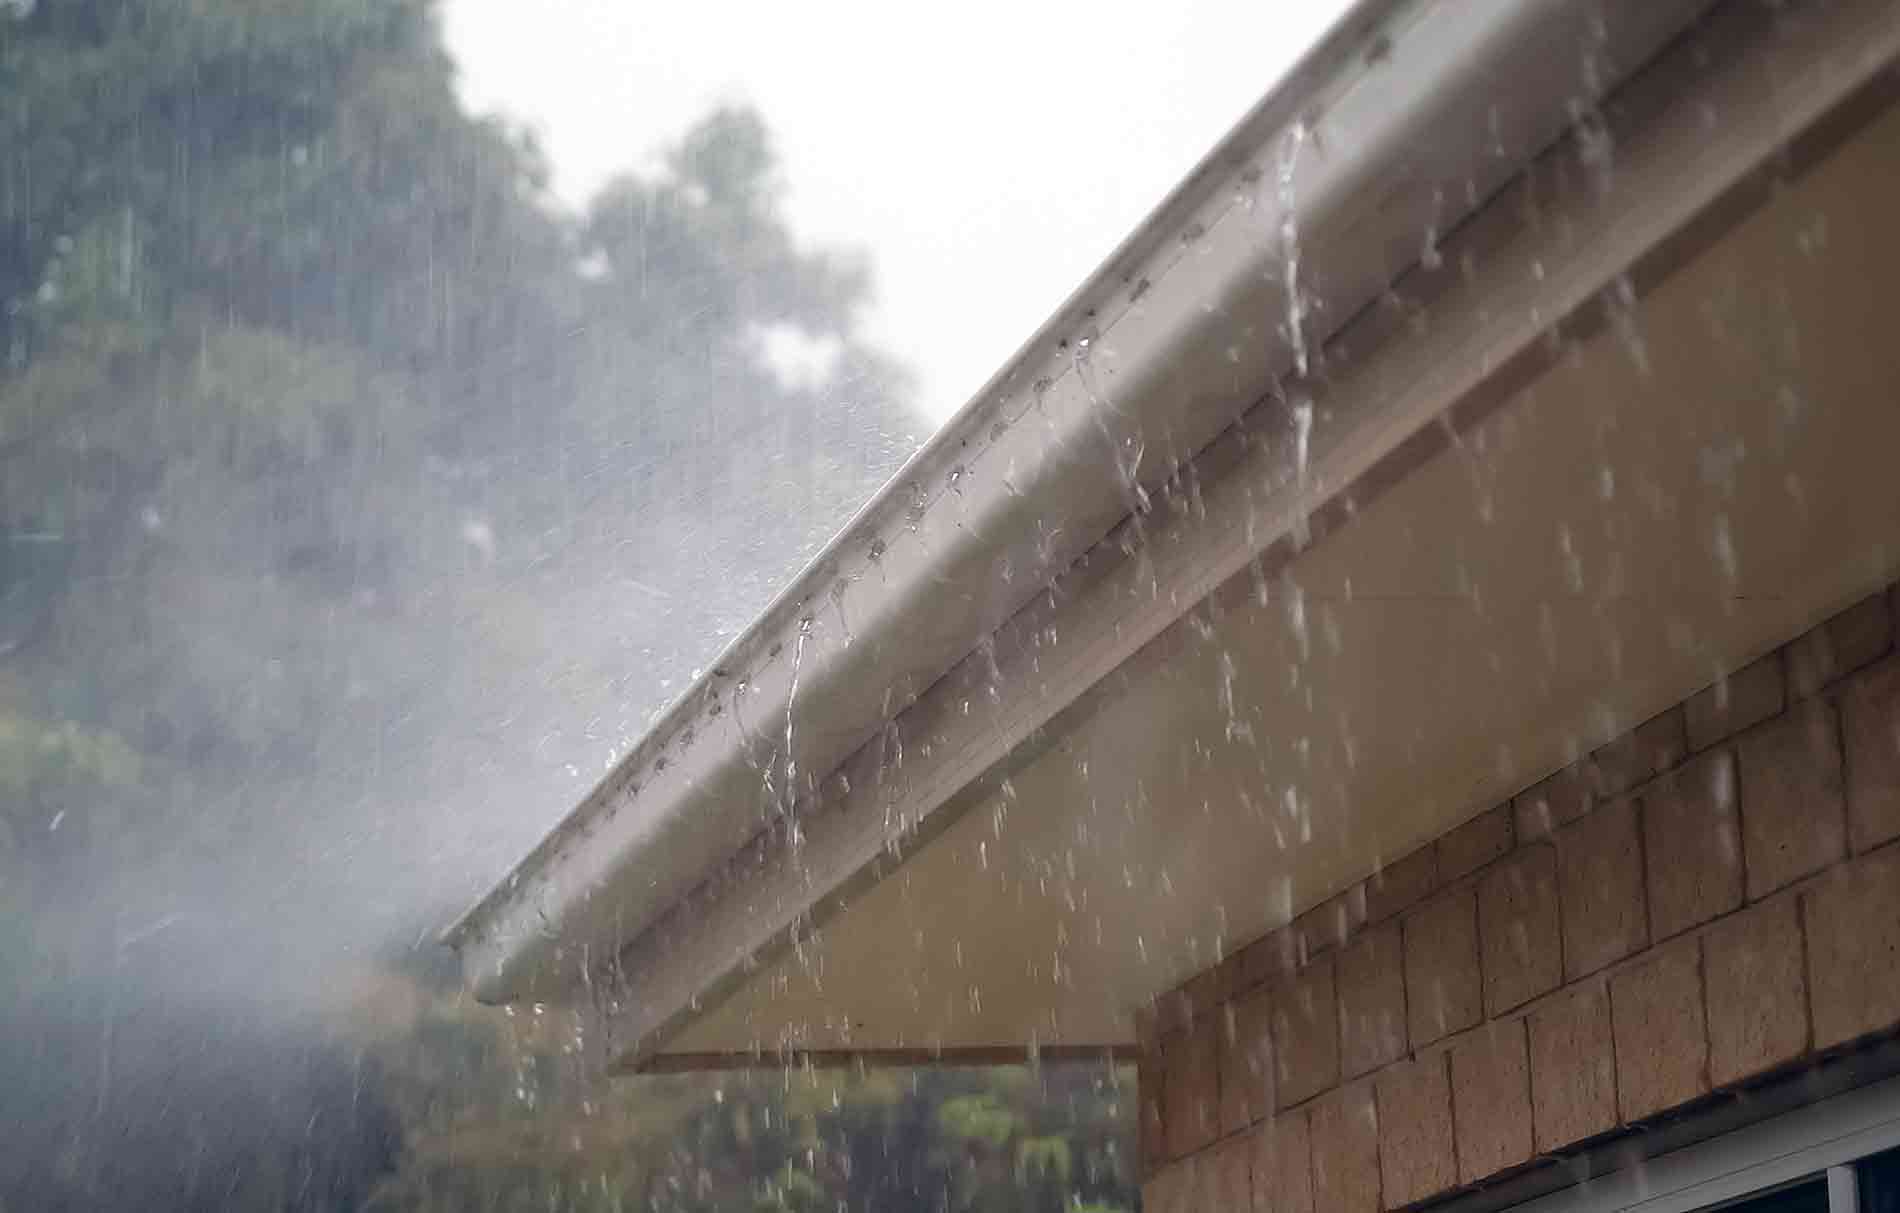 gutters overflowing with rain water